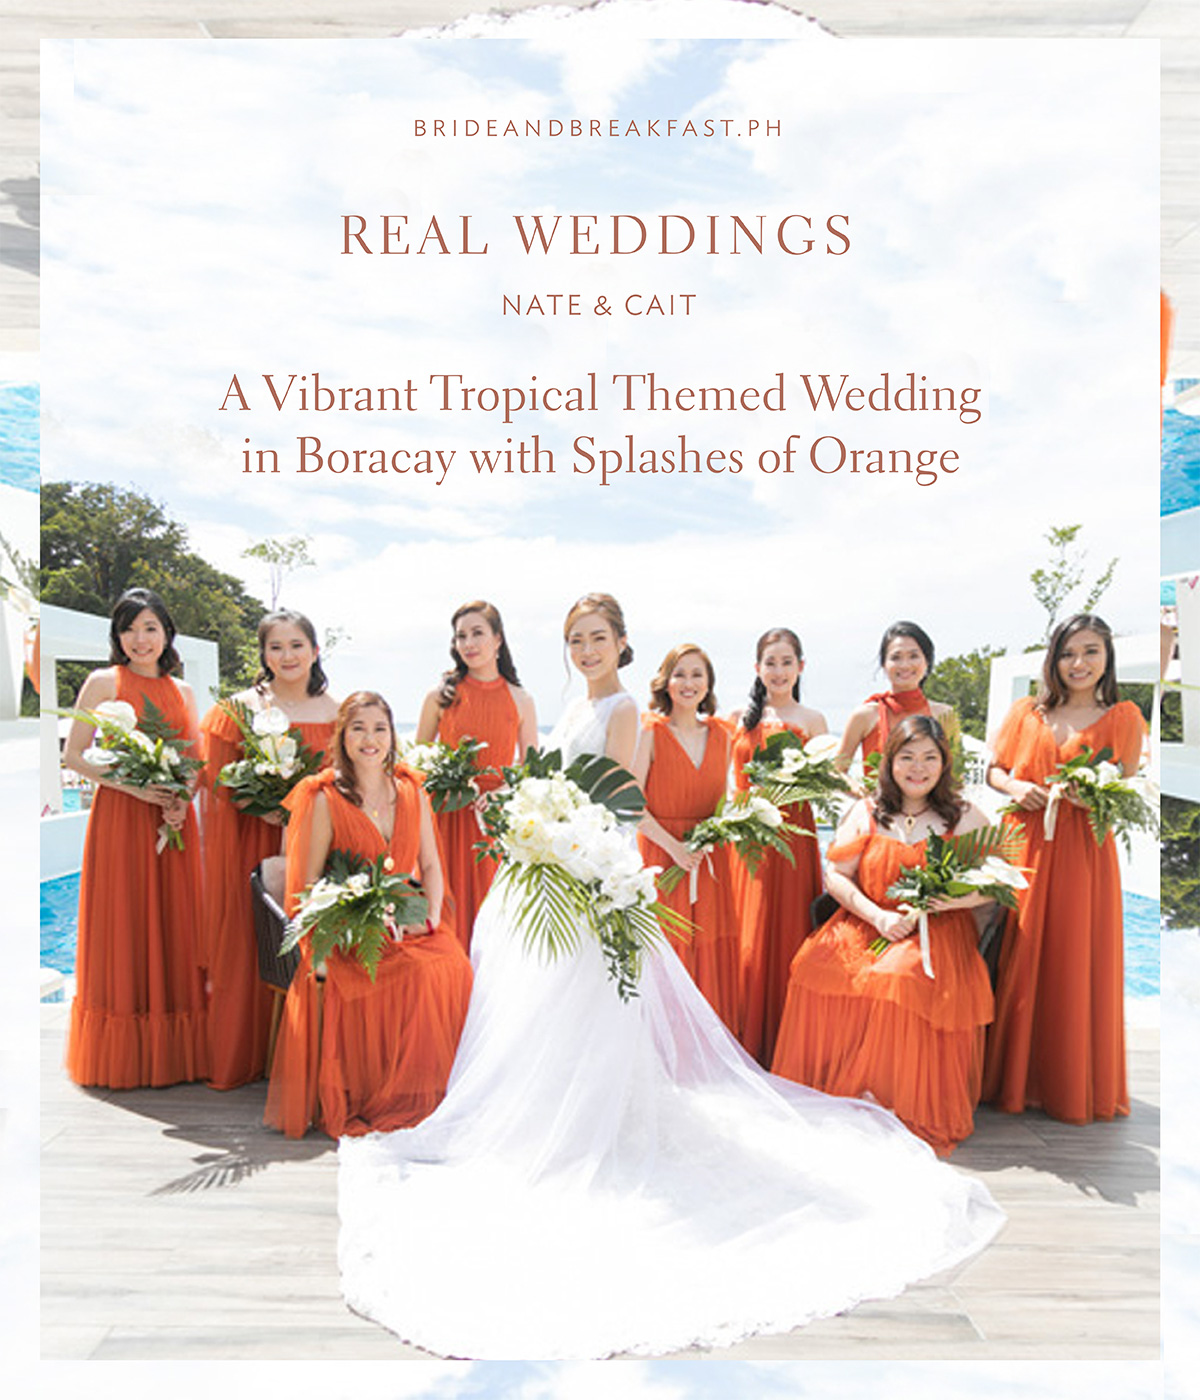 A Vibrant Tropical Themed Wedding in Boracay with Splashes of Orange